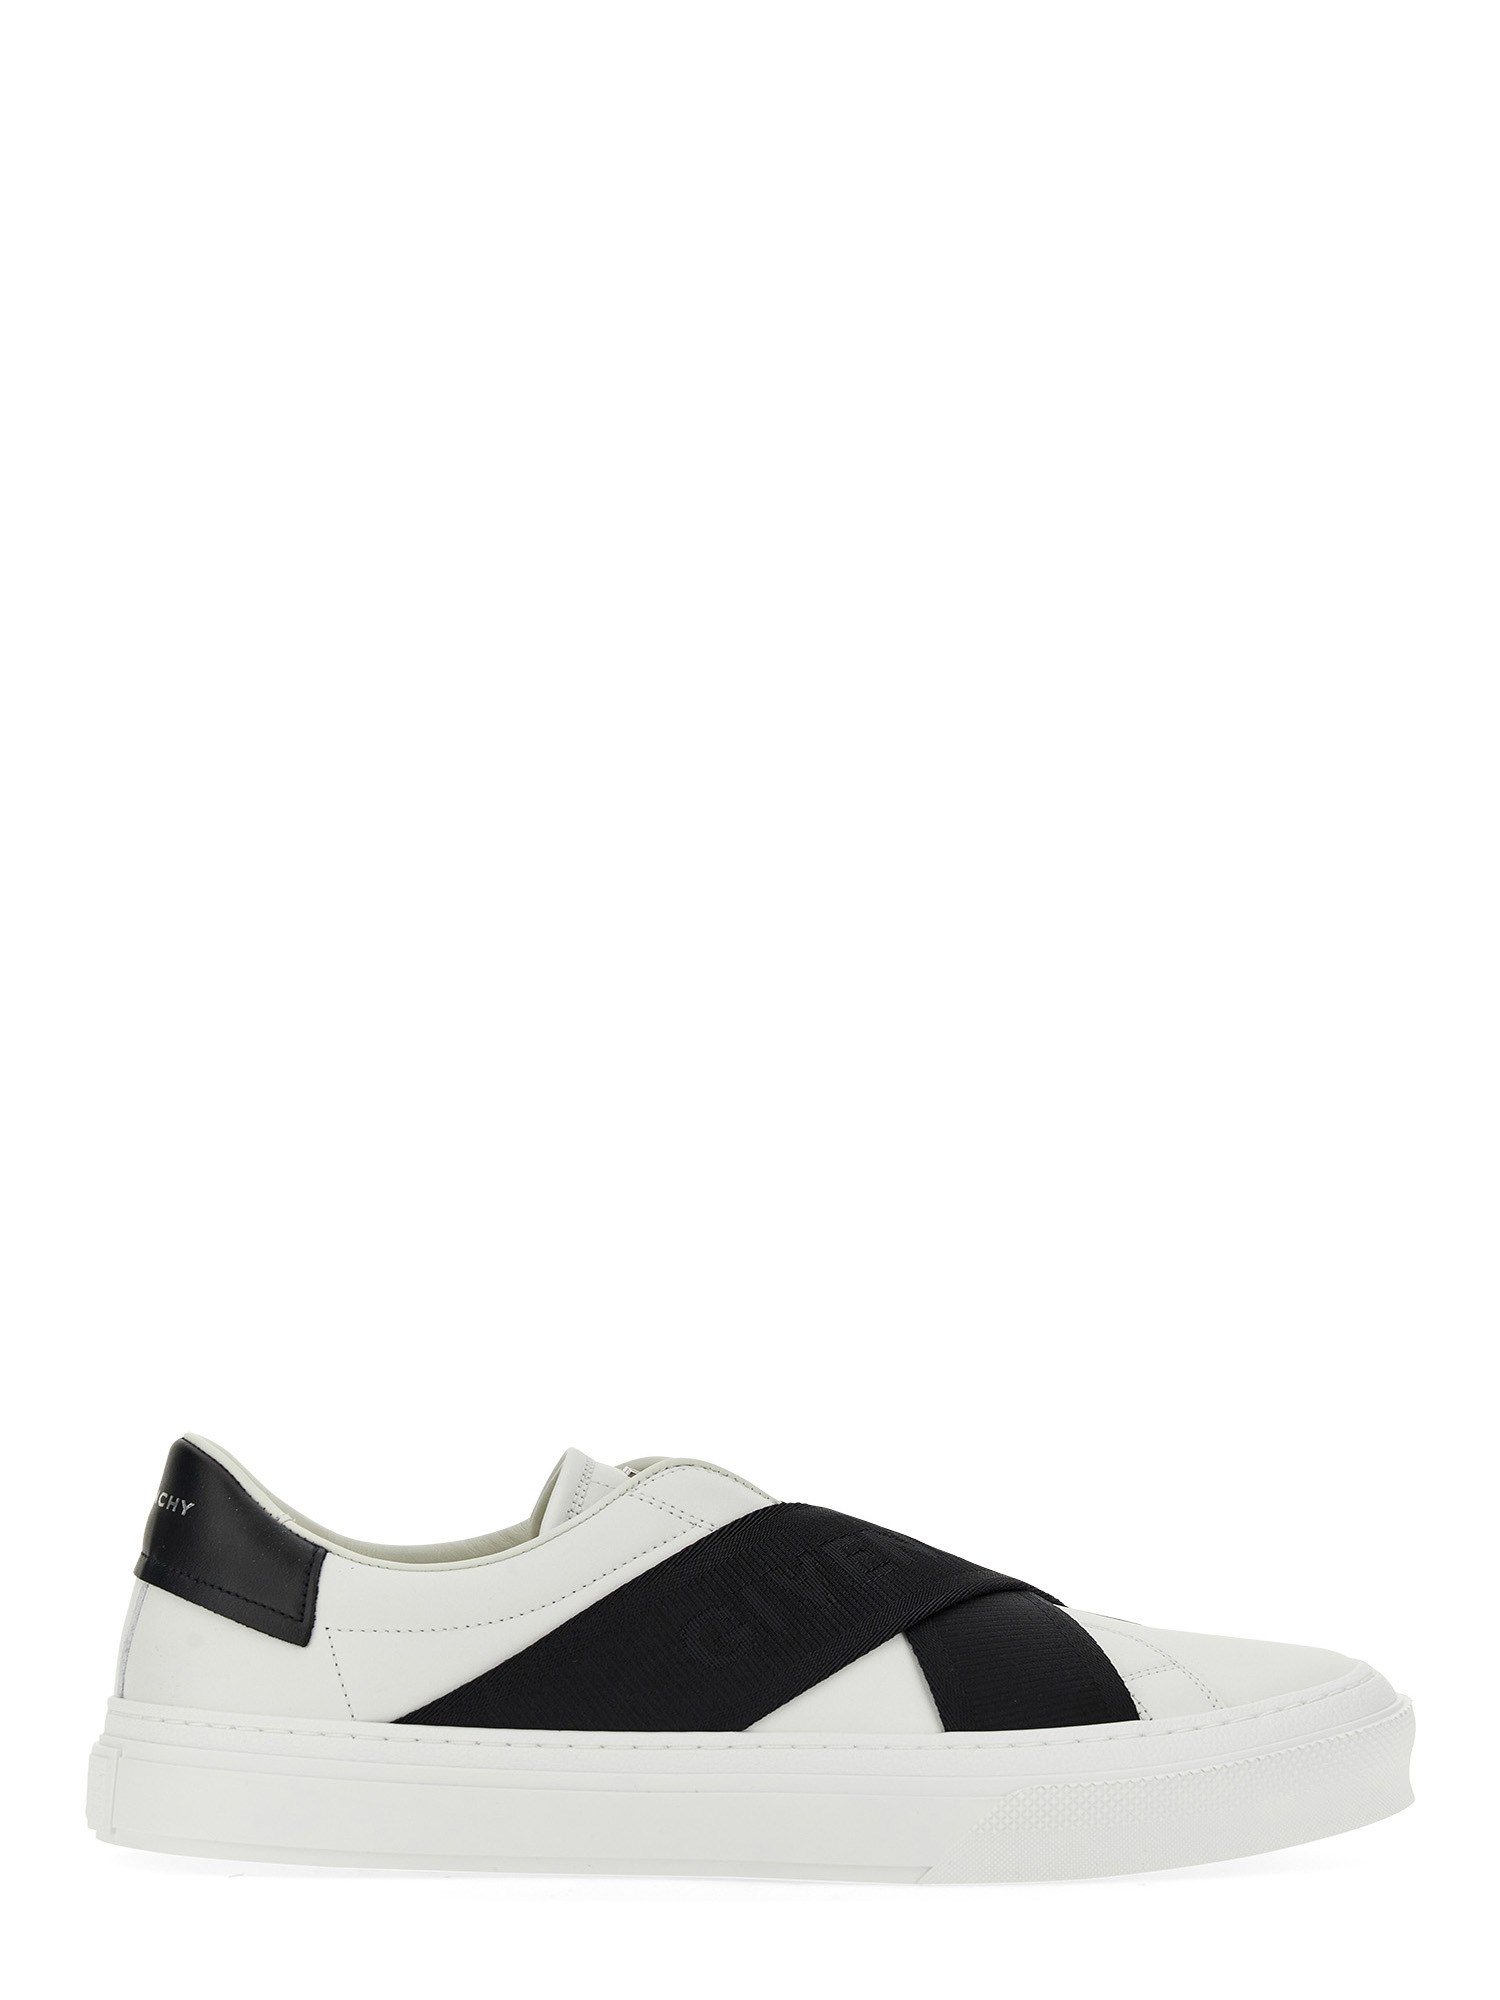 givenchy city sport sneaker